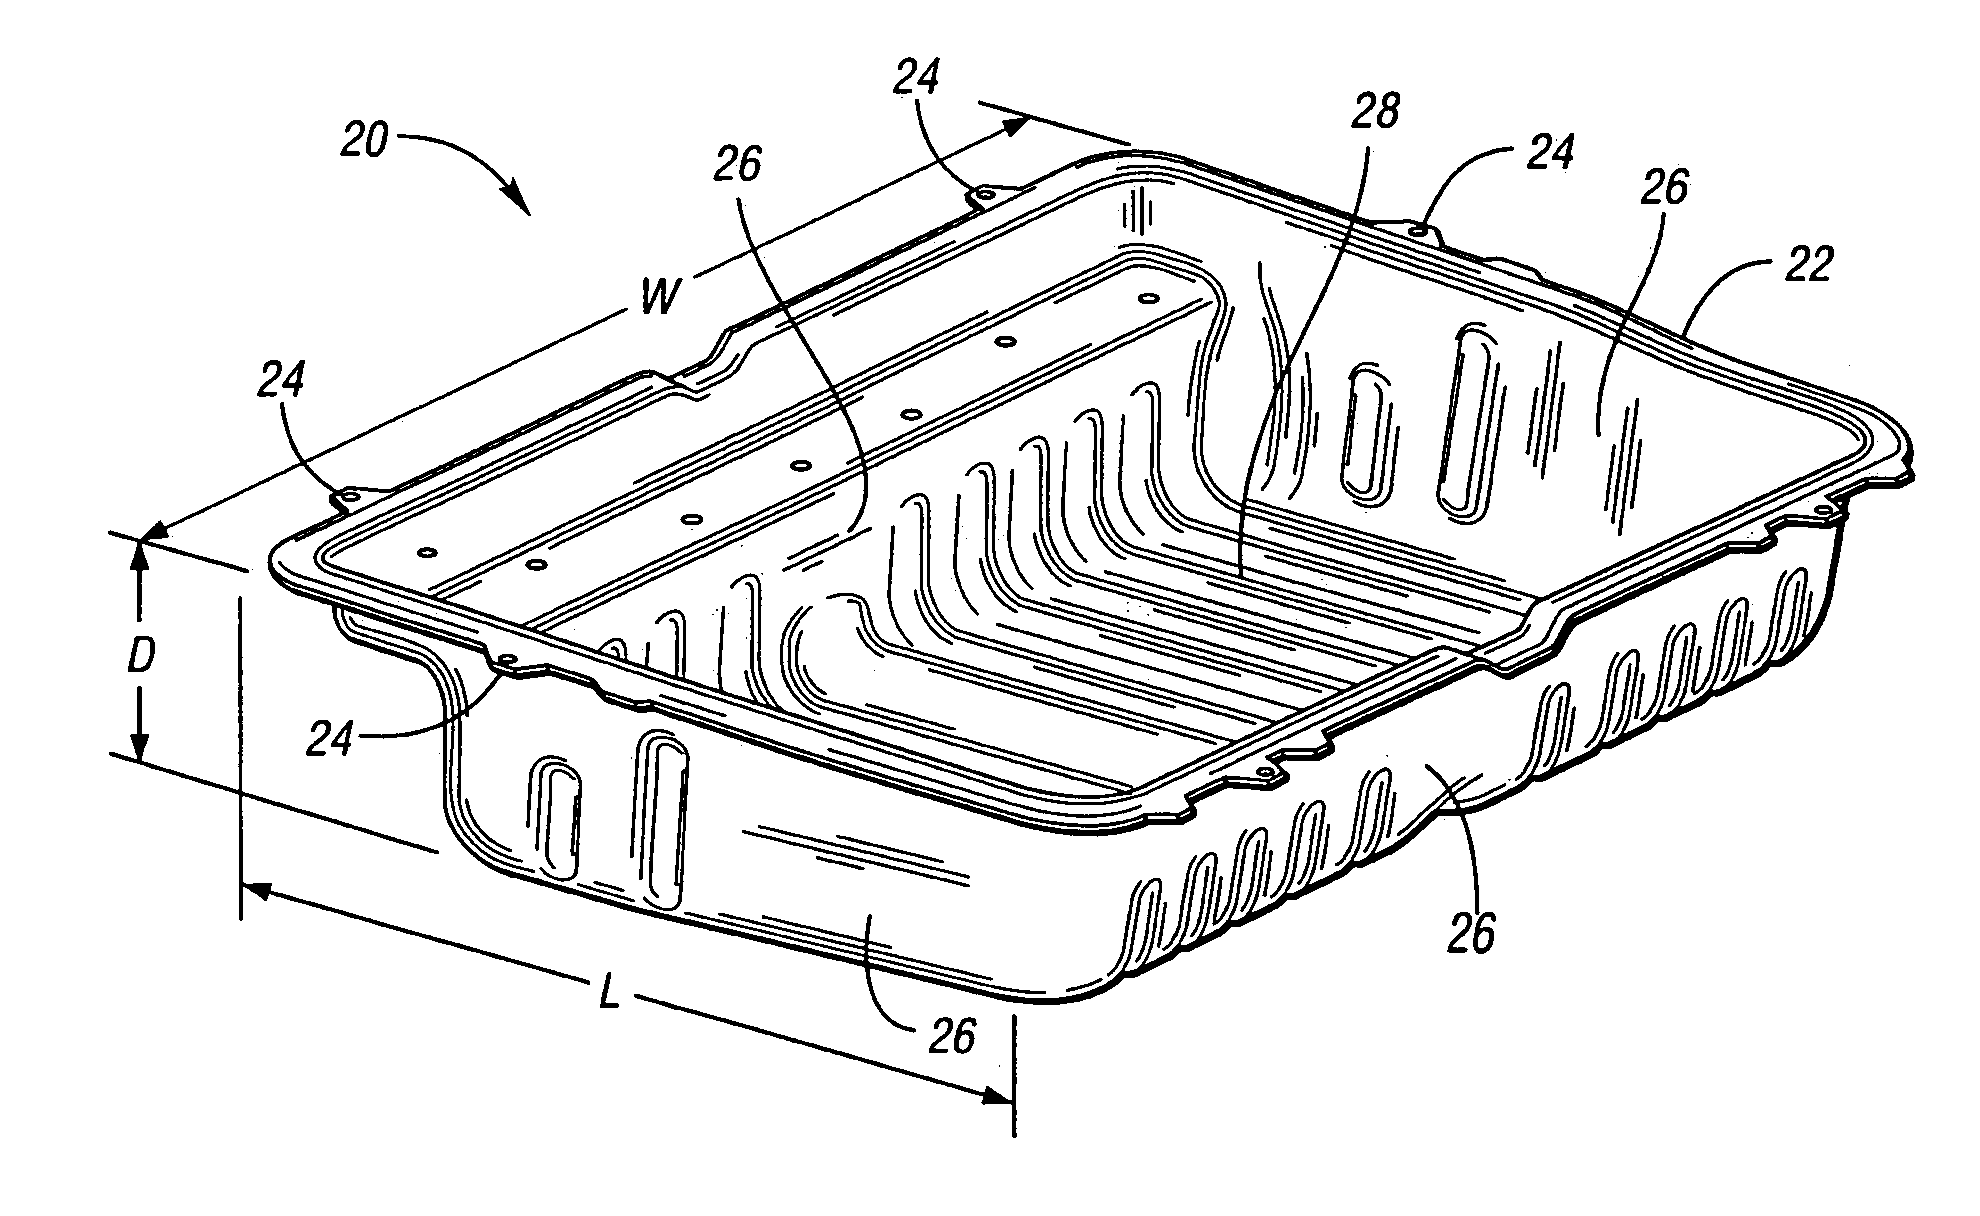 Vehicle floor tub having a laminated structure